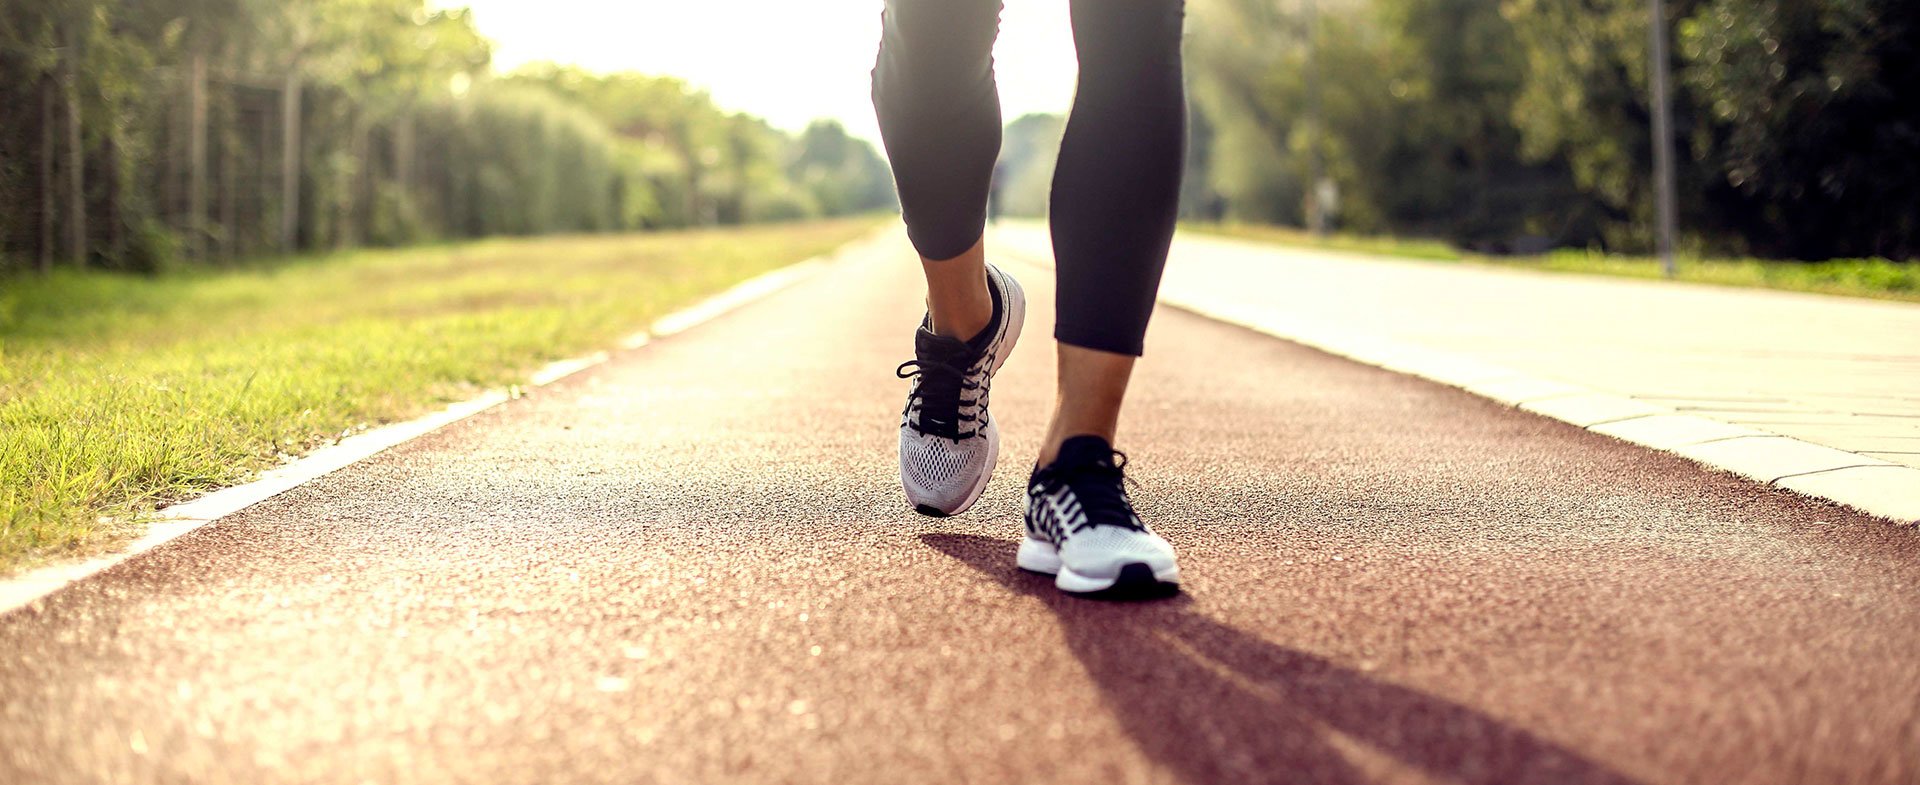 Step up your walking fitness - Harvard Health